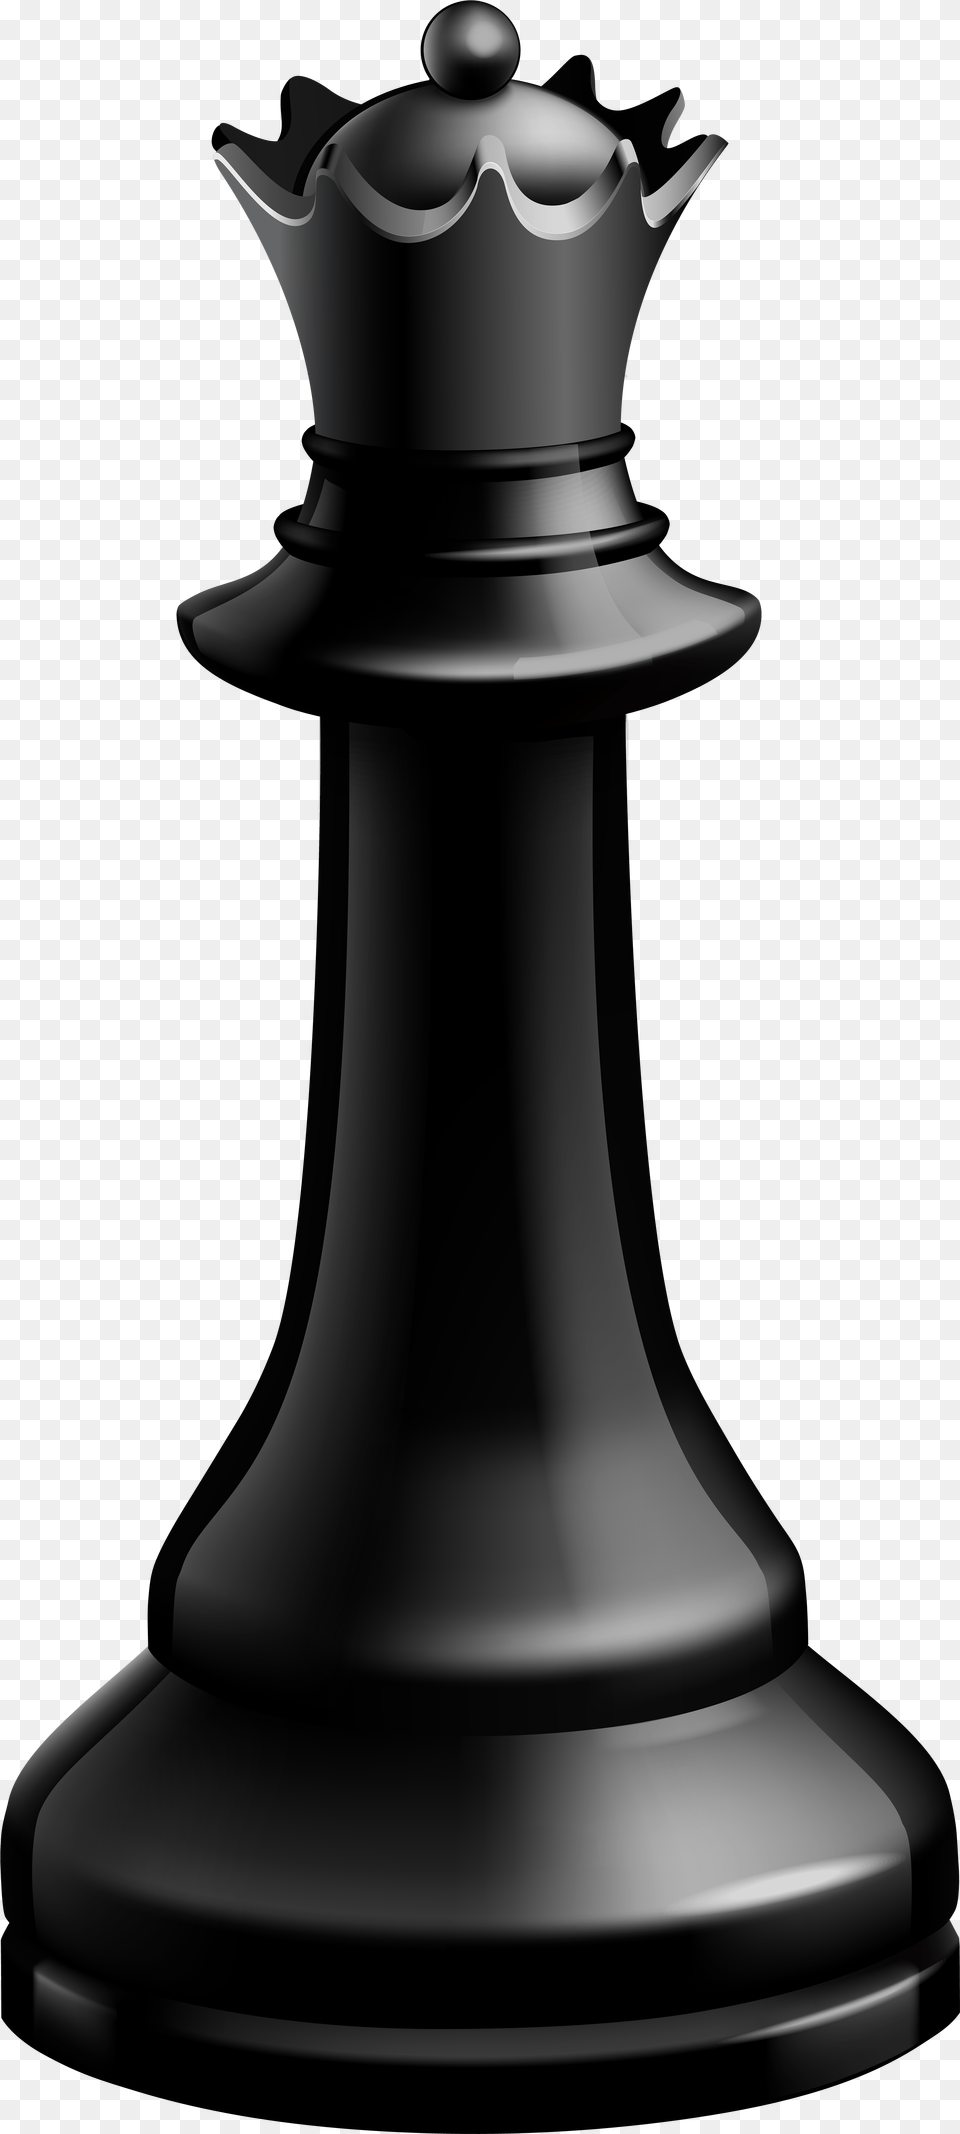 Chess Piece Queen Knight Chessboard Source King Chess Piece, Smoke Pipe, Game Free Transparent Png